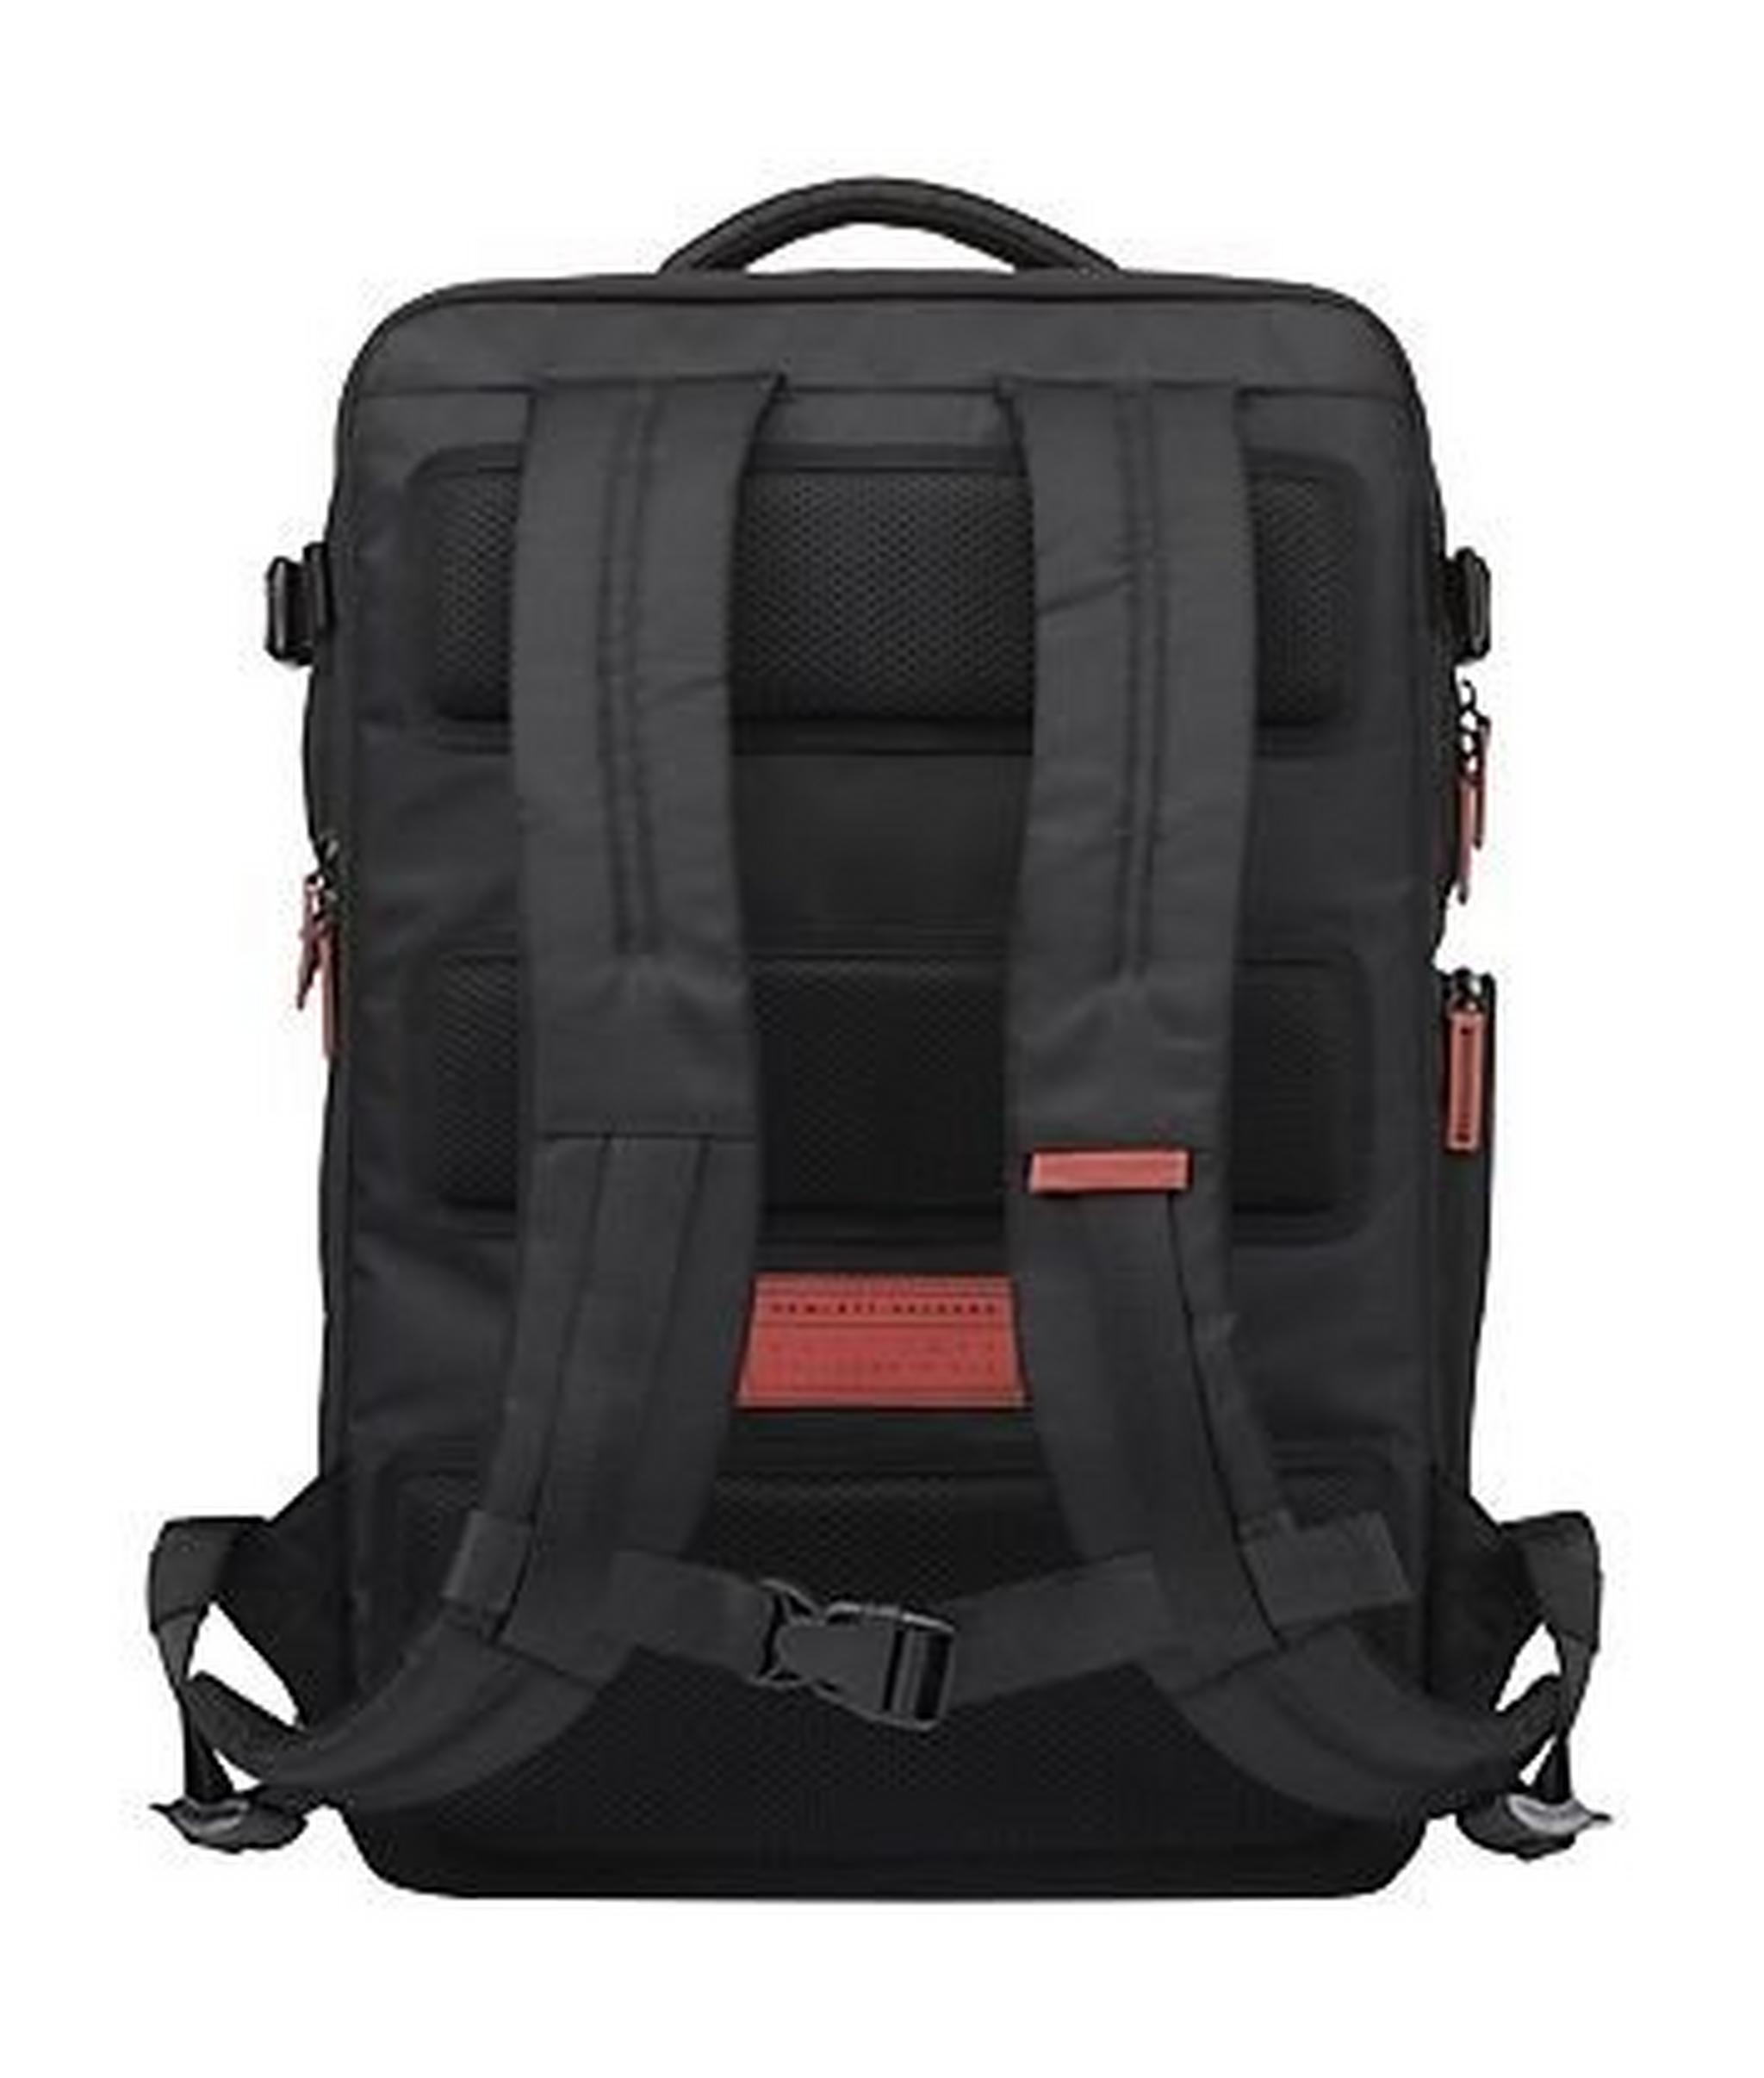 HP Steel Series Omen Gaming Laptop Bag Up To 17.3 Inches